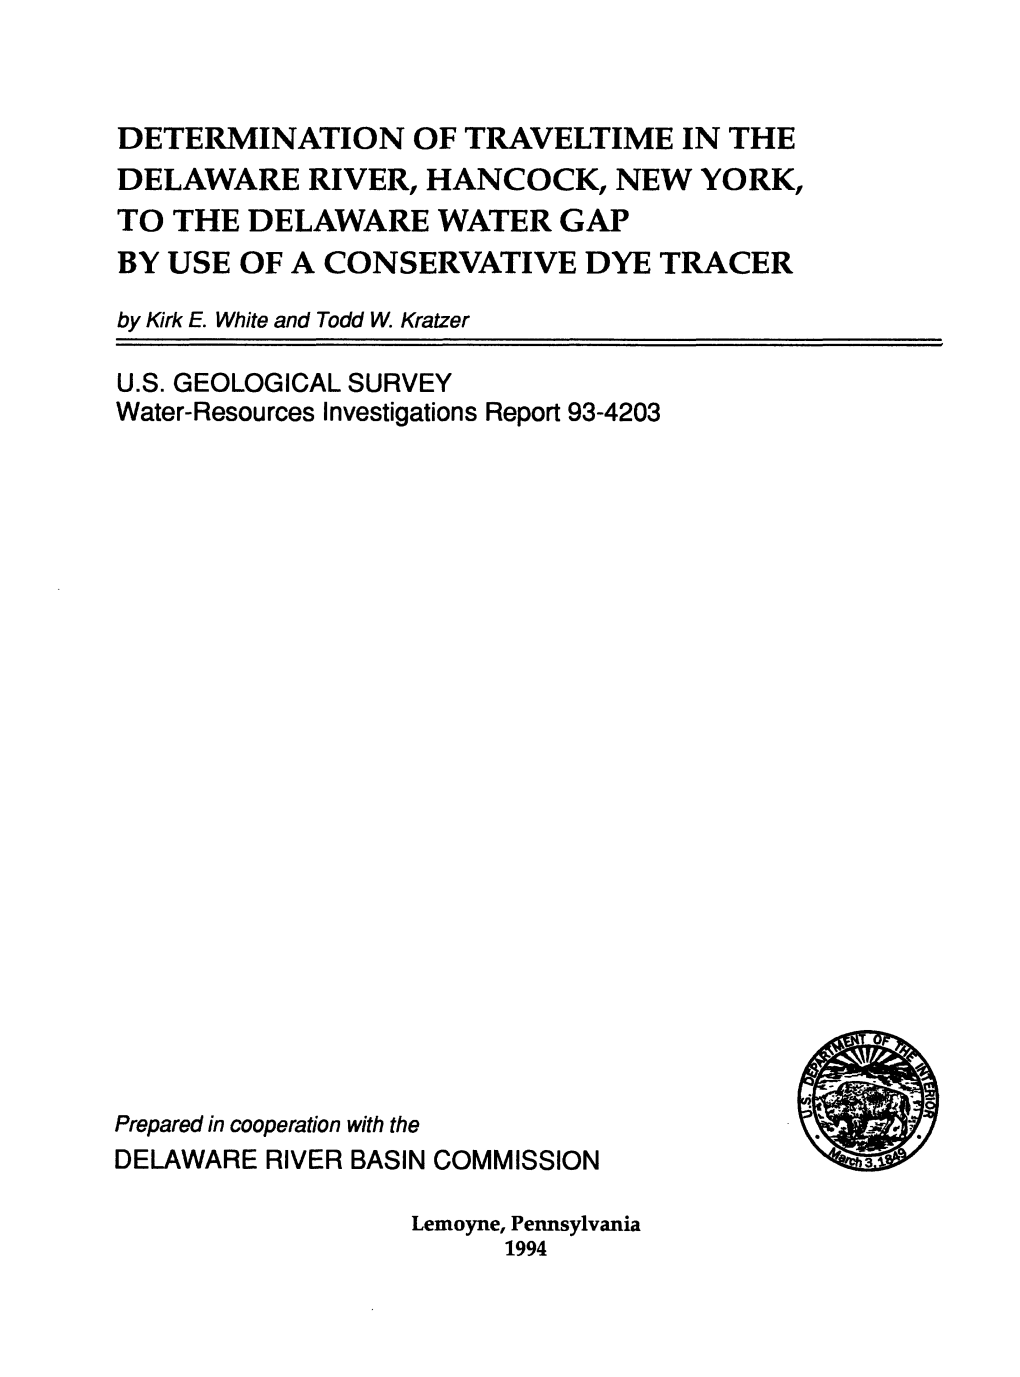 DETERMINATION of TRAVELTIME in the DELAWARE RIVER, HANCOCK, NEW YORK, to the DELAWARE WATER GAP by USE of a CONSERVATIVE DYE TRACER by Kirk E